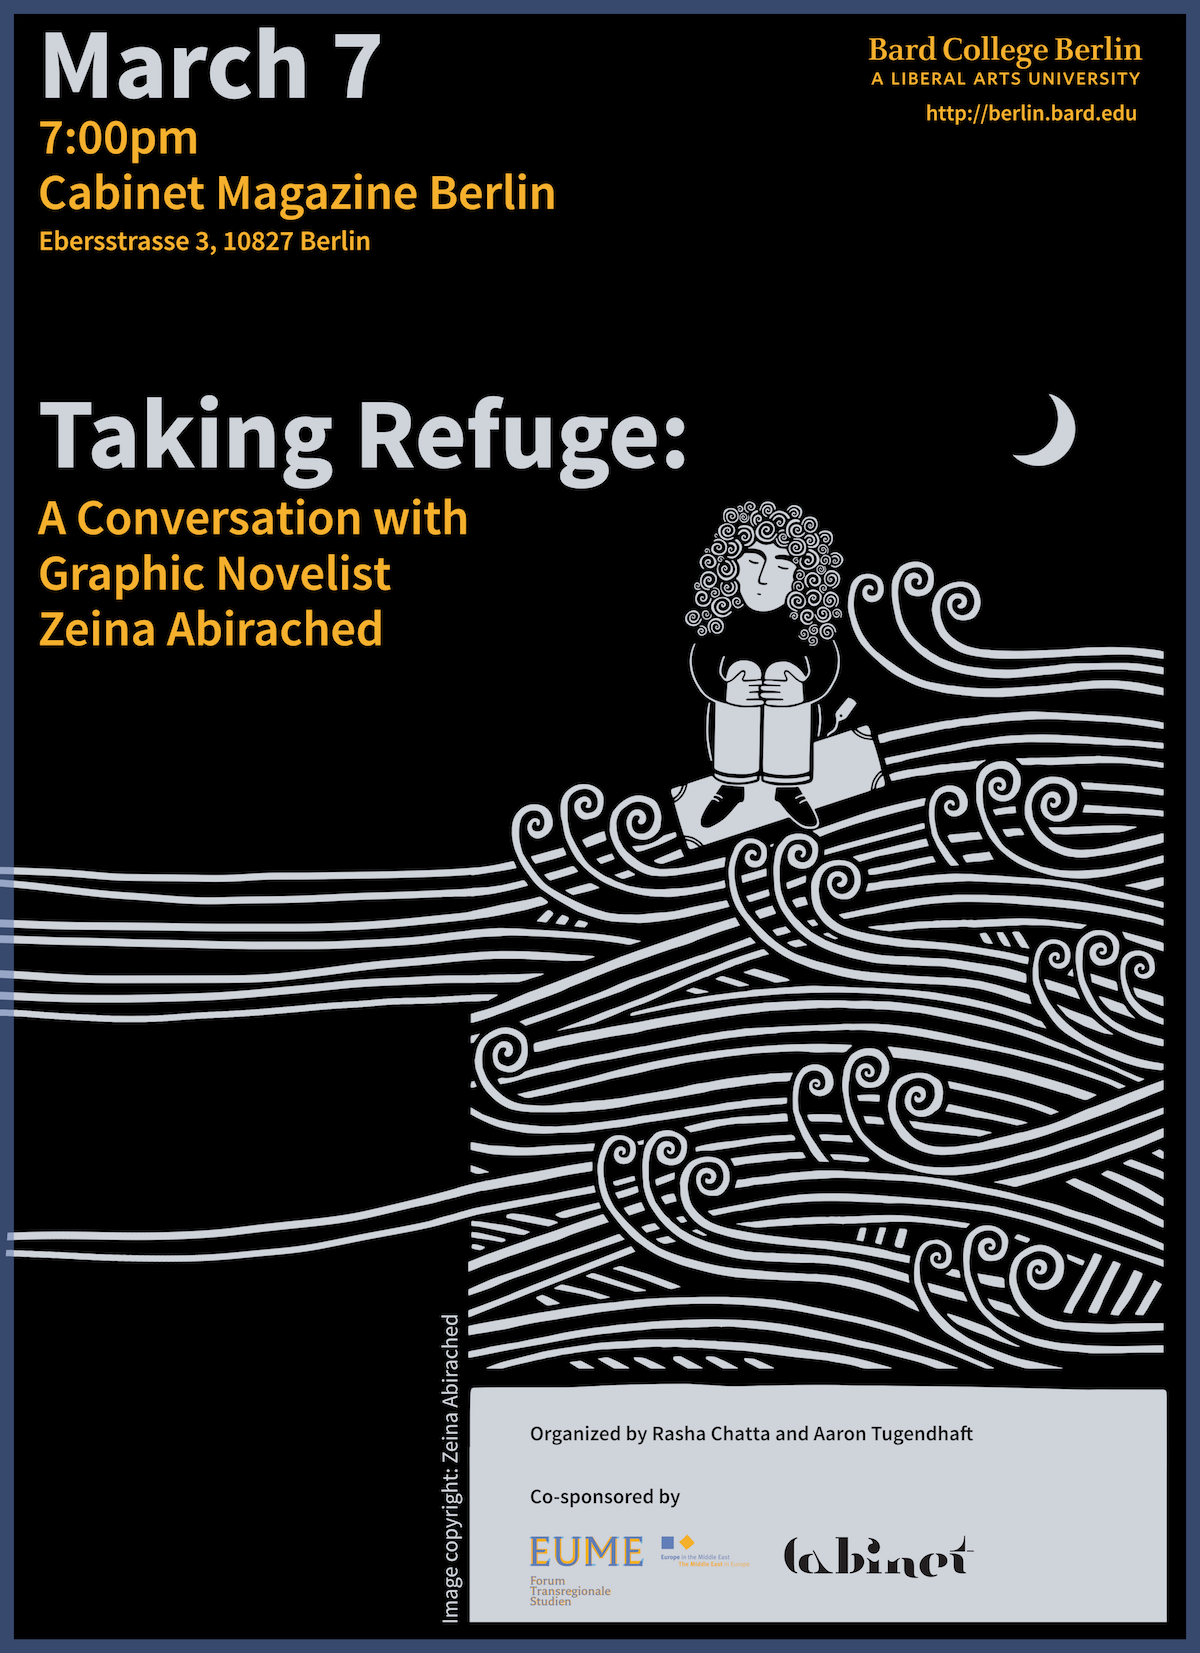 Taking Refuge: A Conversation with Graphic Novelist Zeina Abirached